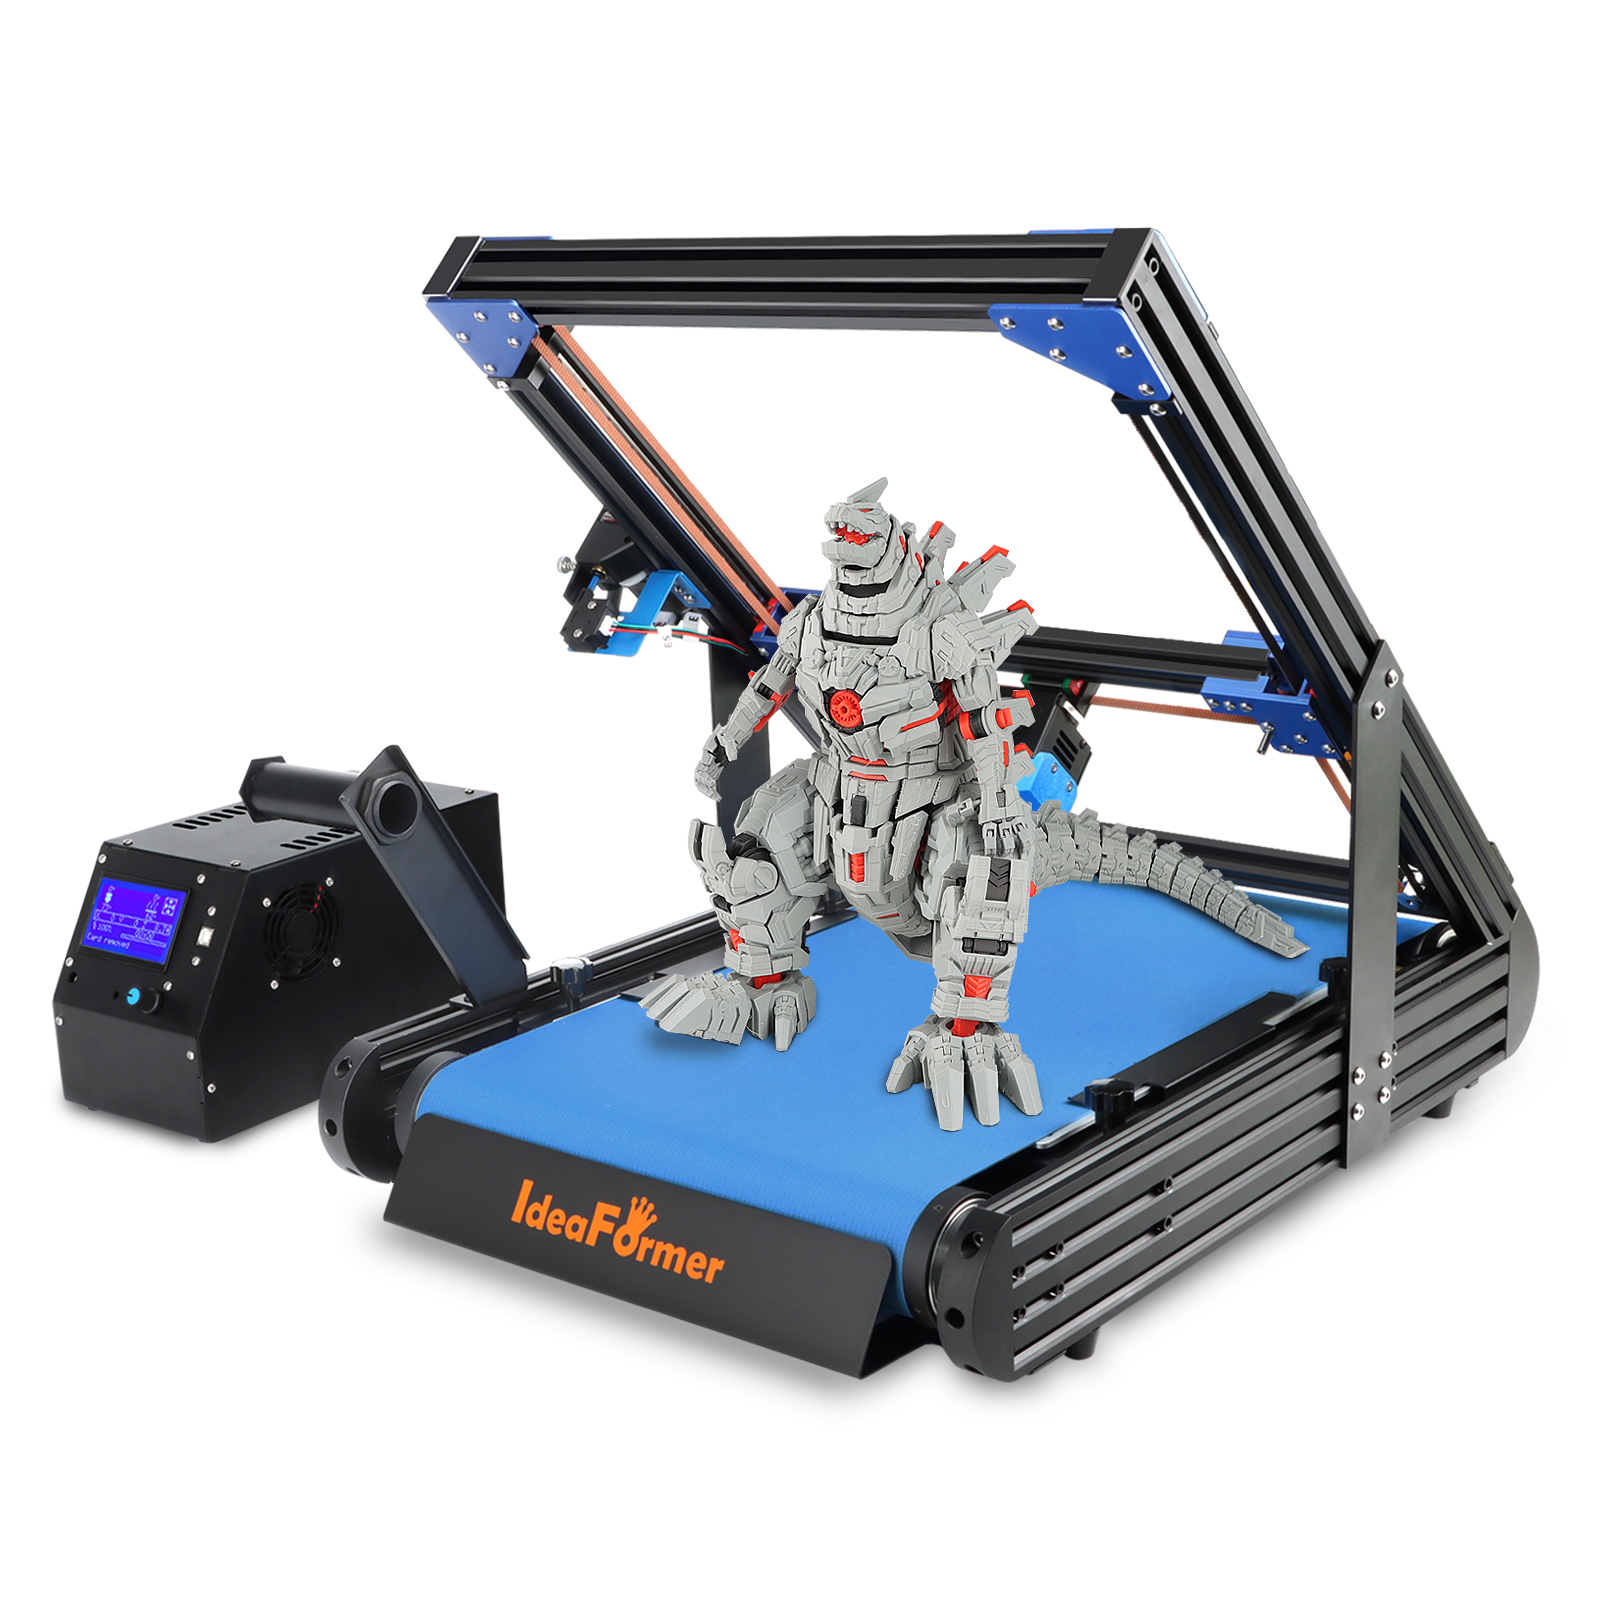 (New released) IdeaFormer-3D IR3 V1 Infinite Z-Axis Belt 3D Printer 250×250×∞mm with PLA,Double Gear Extruder,Silent Motherboard,Core-XY Structure for Industury, Cosplay Props Print, 3D Printer Farm, Batch Printing